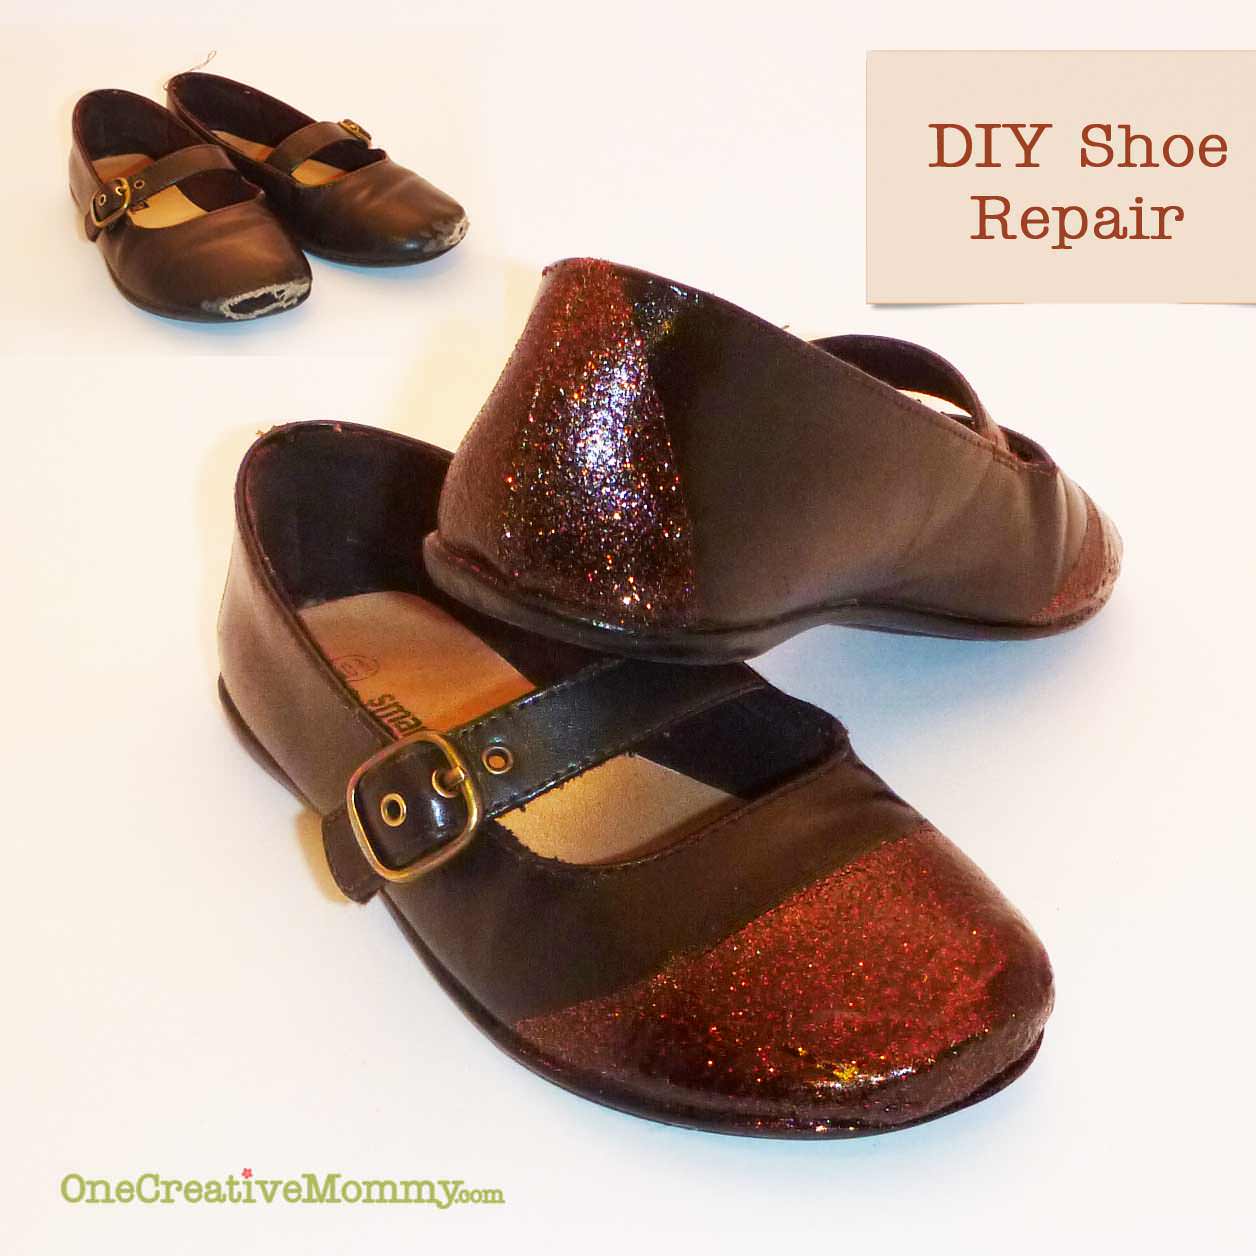 Repairing Scuffed Shoes {OneCreativeMommy.com} Add new life to your kids (or your) shoes!  #shoe#repair